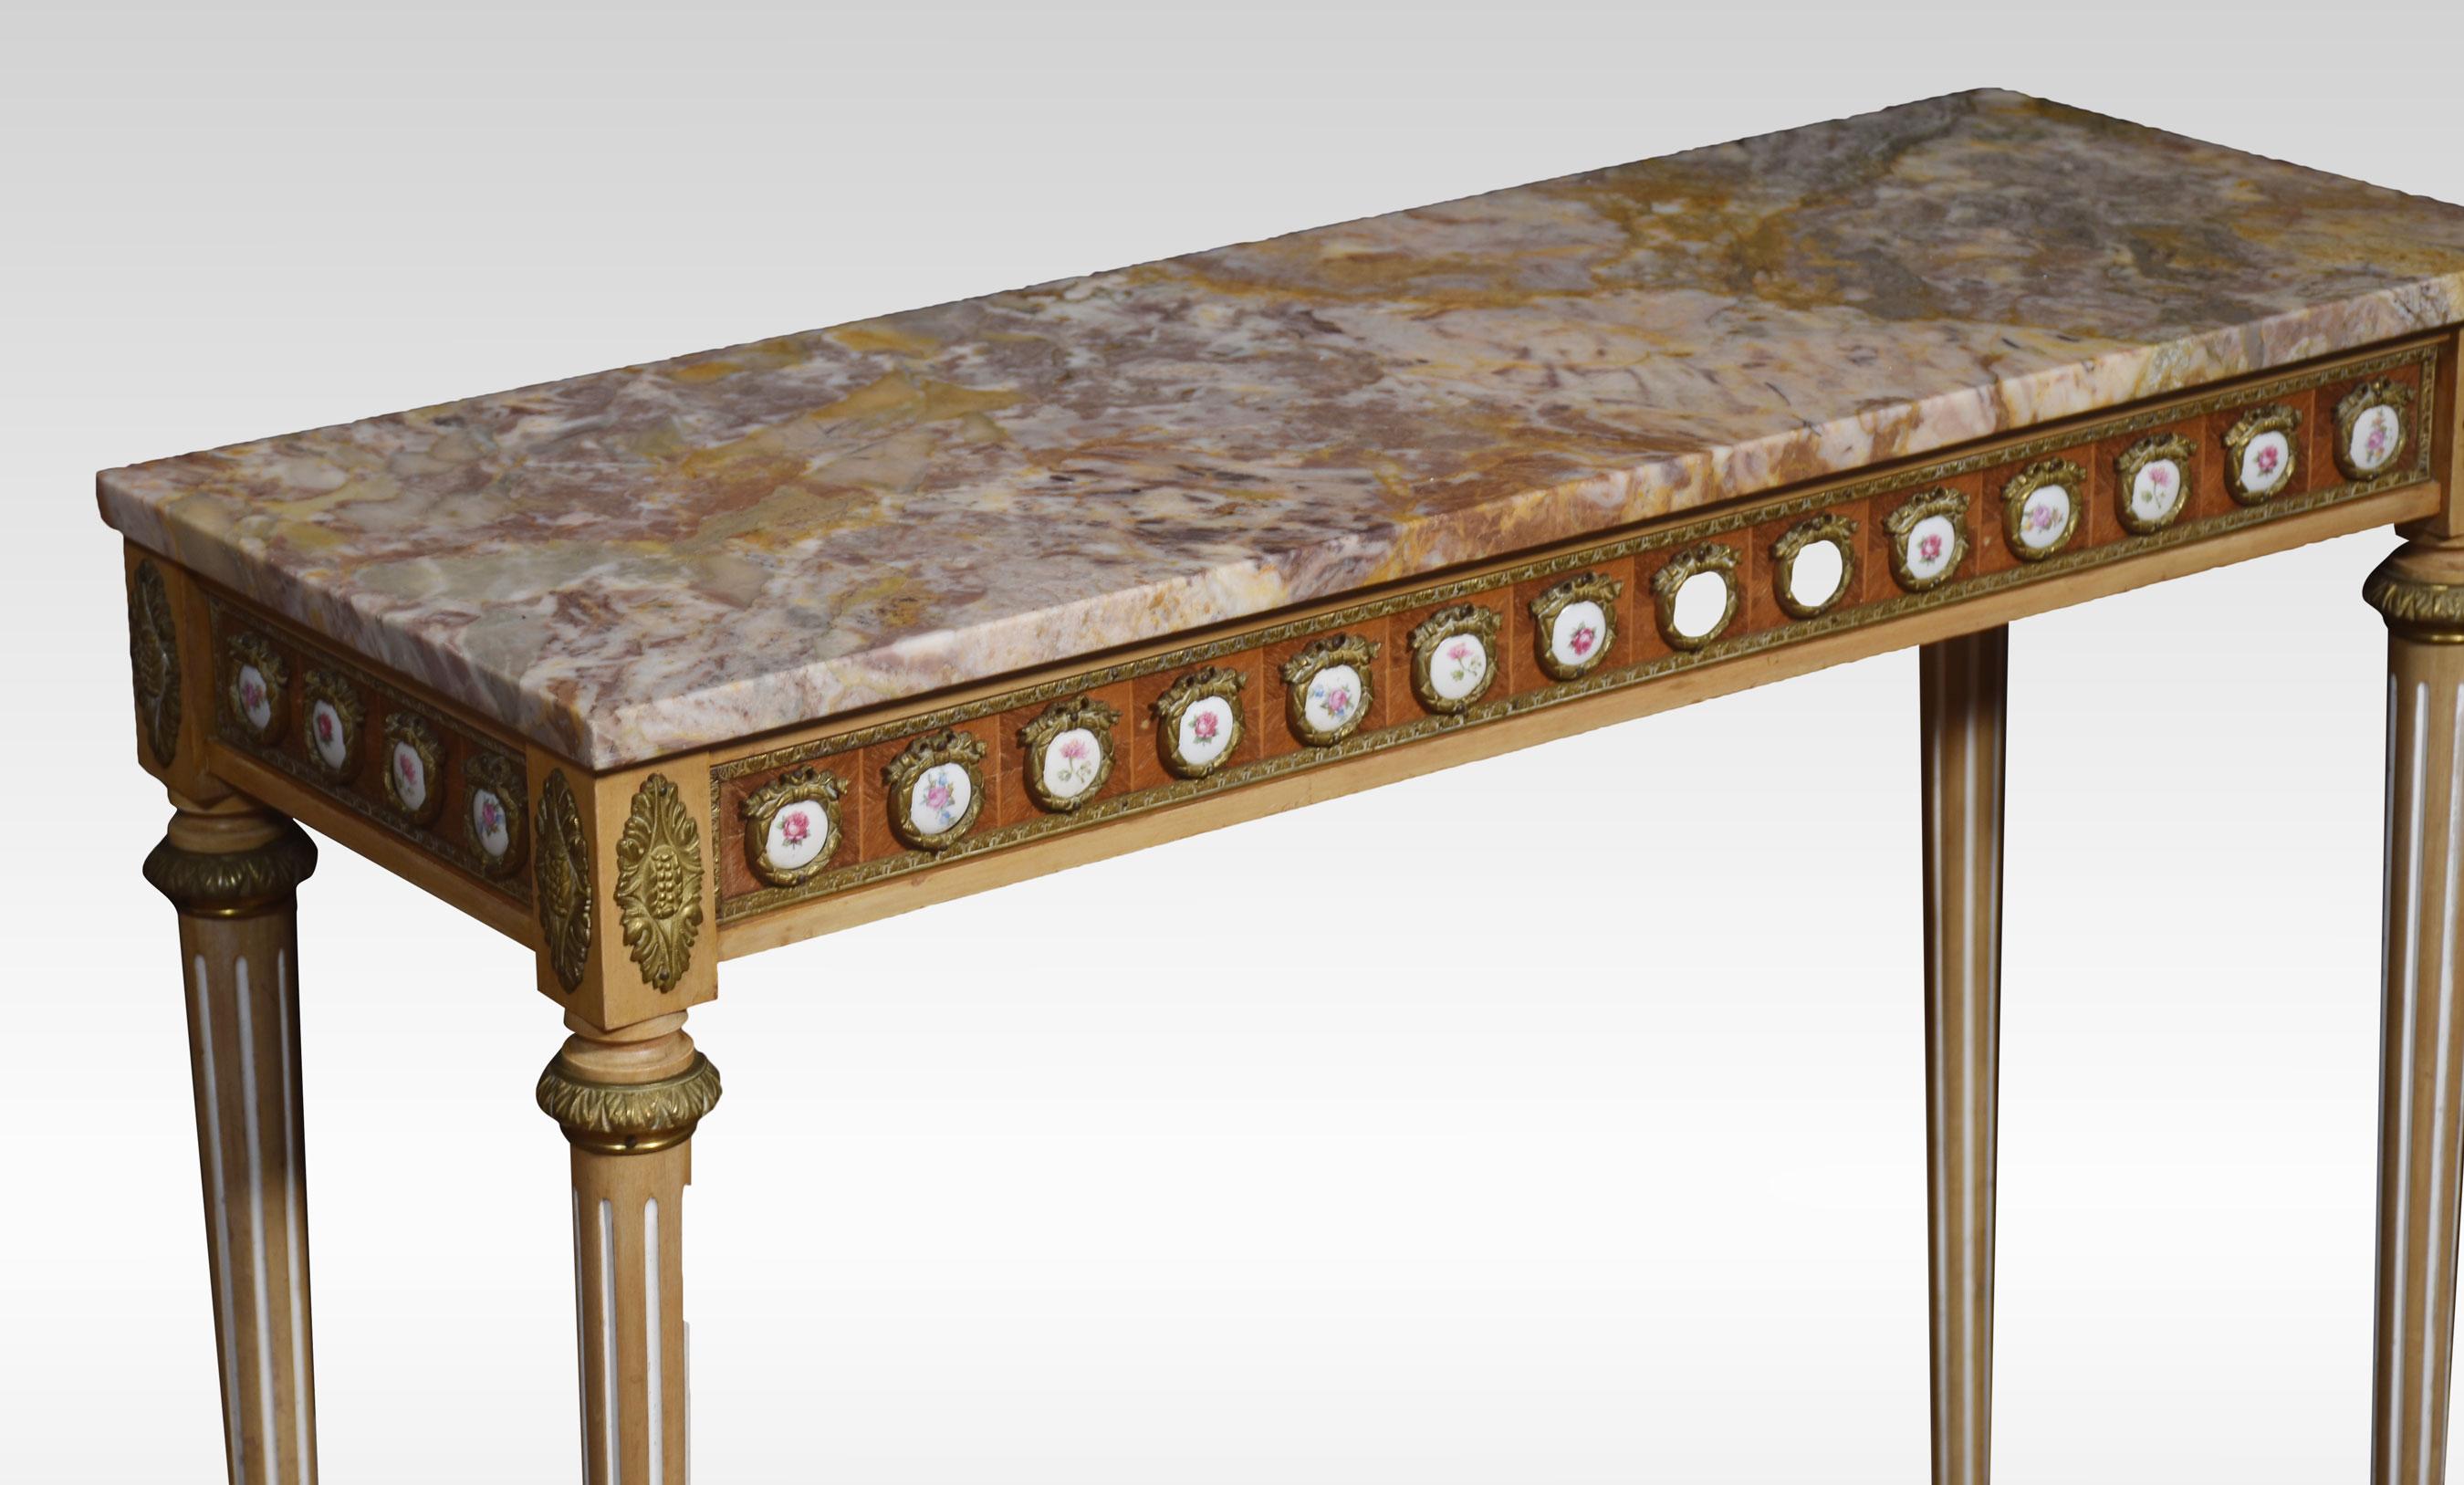 Pair of Louis XVI revival console tables by H & L Epstein 1